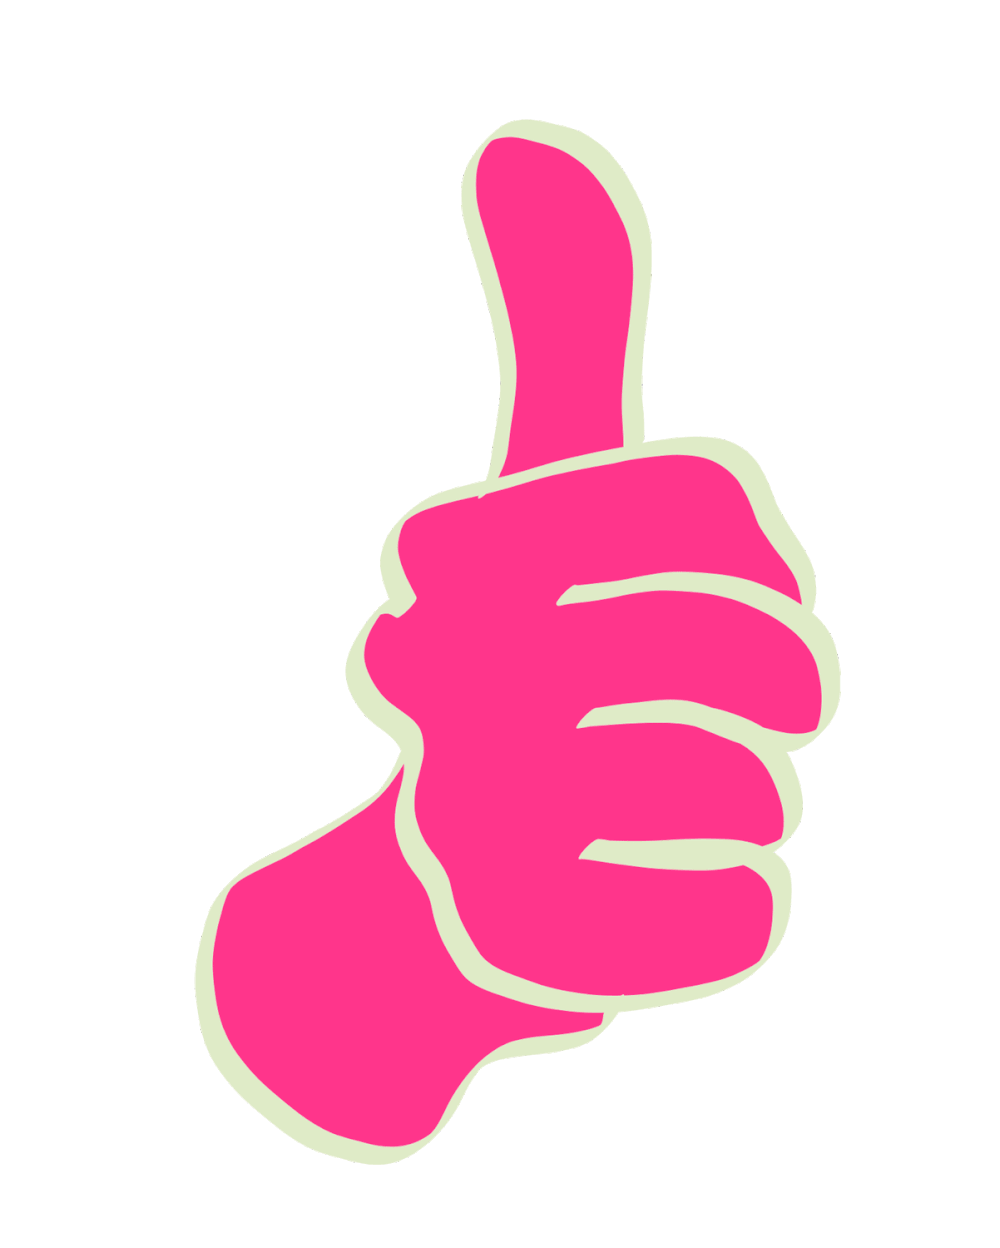 [Kép: Thumbs-up.gif?format=1000w&content-type=image%2Fgif]